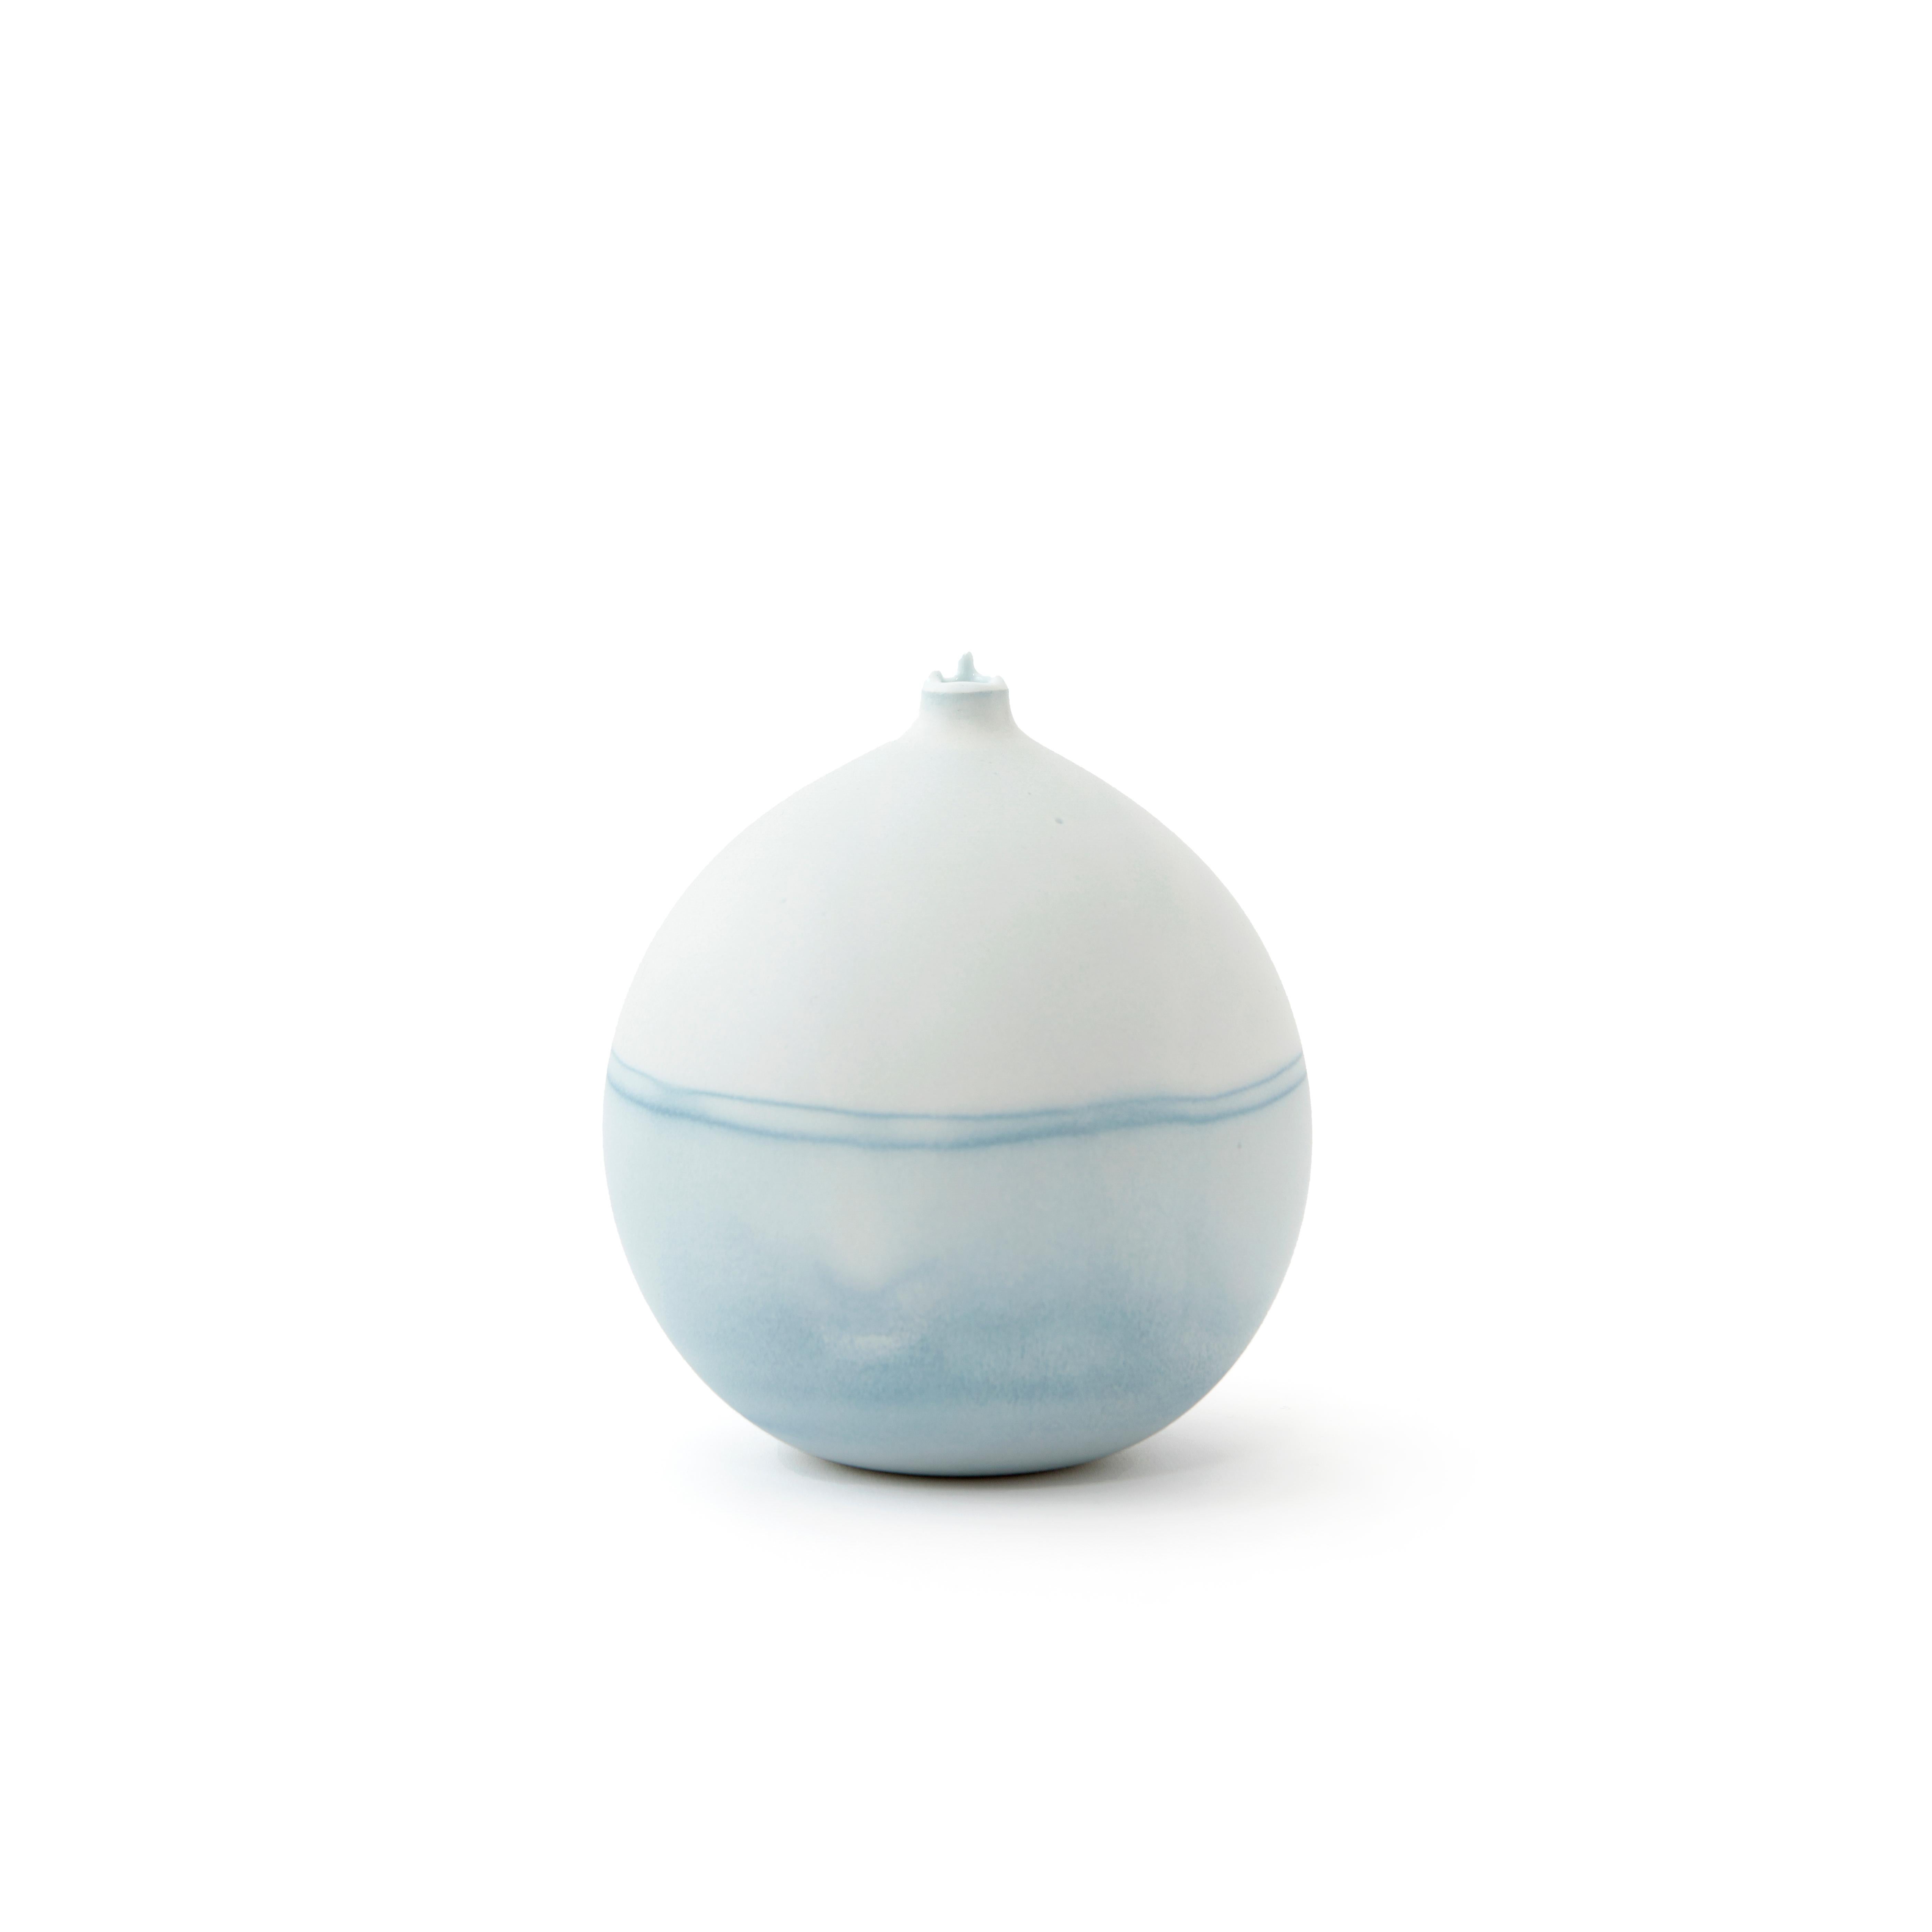 Ice blue pluto vase by Elyse Graham
Dimensions: W 13 x D 13 x H 14 cm
Materials: Plaster, Resin
Molded, dyed, and finished by hand in LA. Customization
available.
All pieces are made to order.

This collection of vessels is inspired by